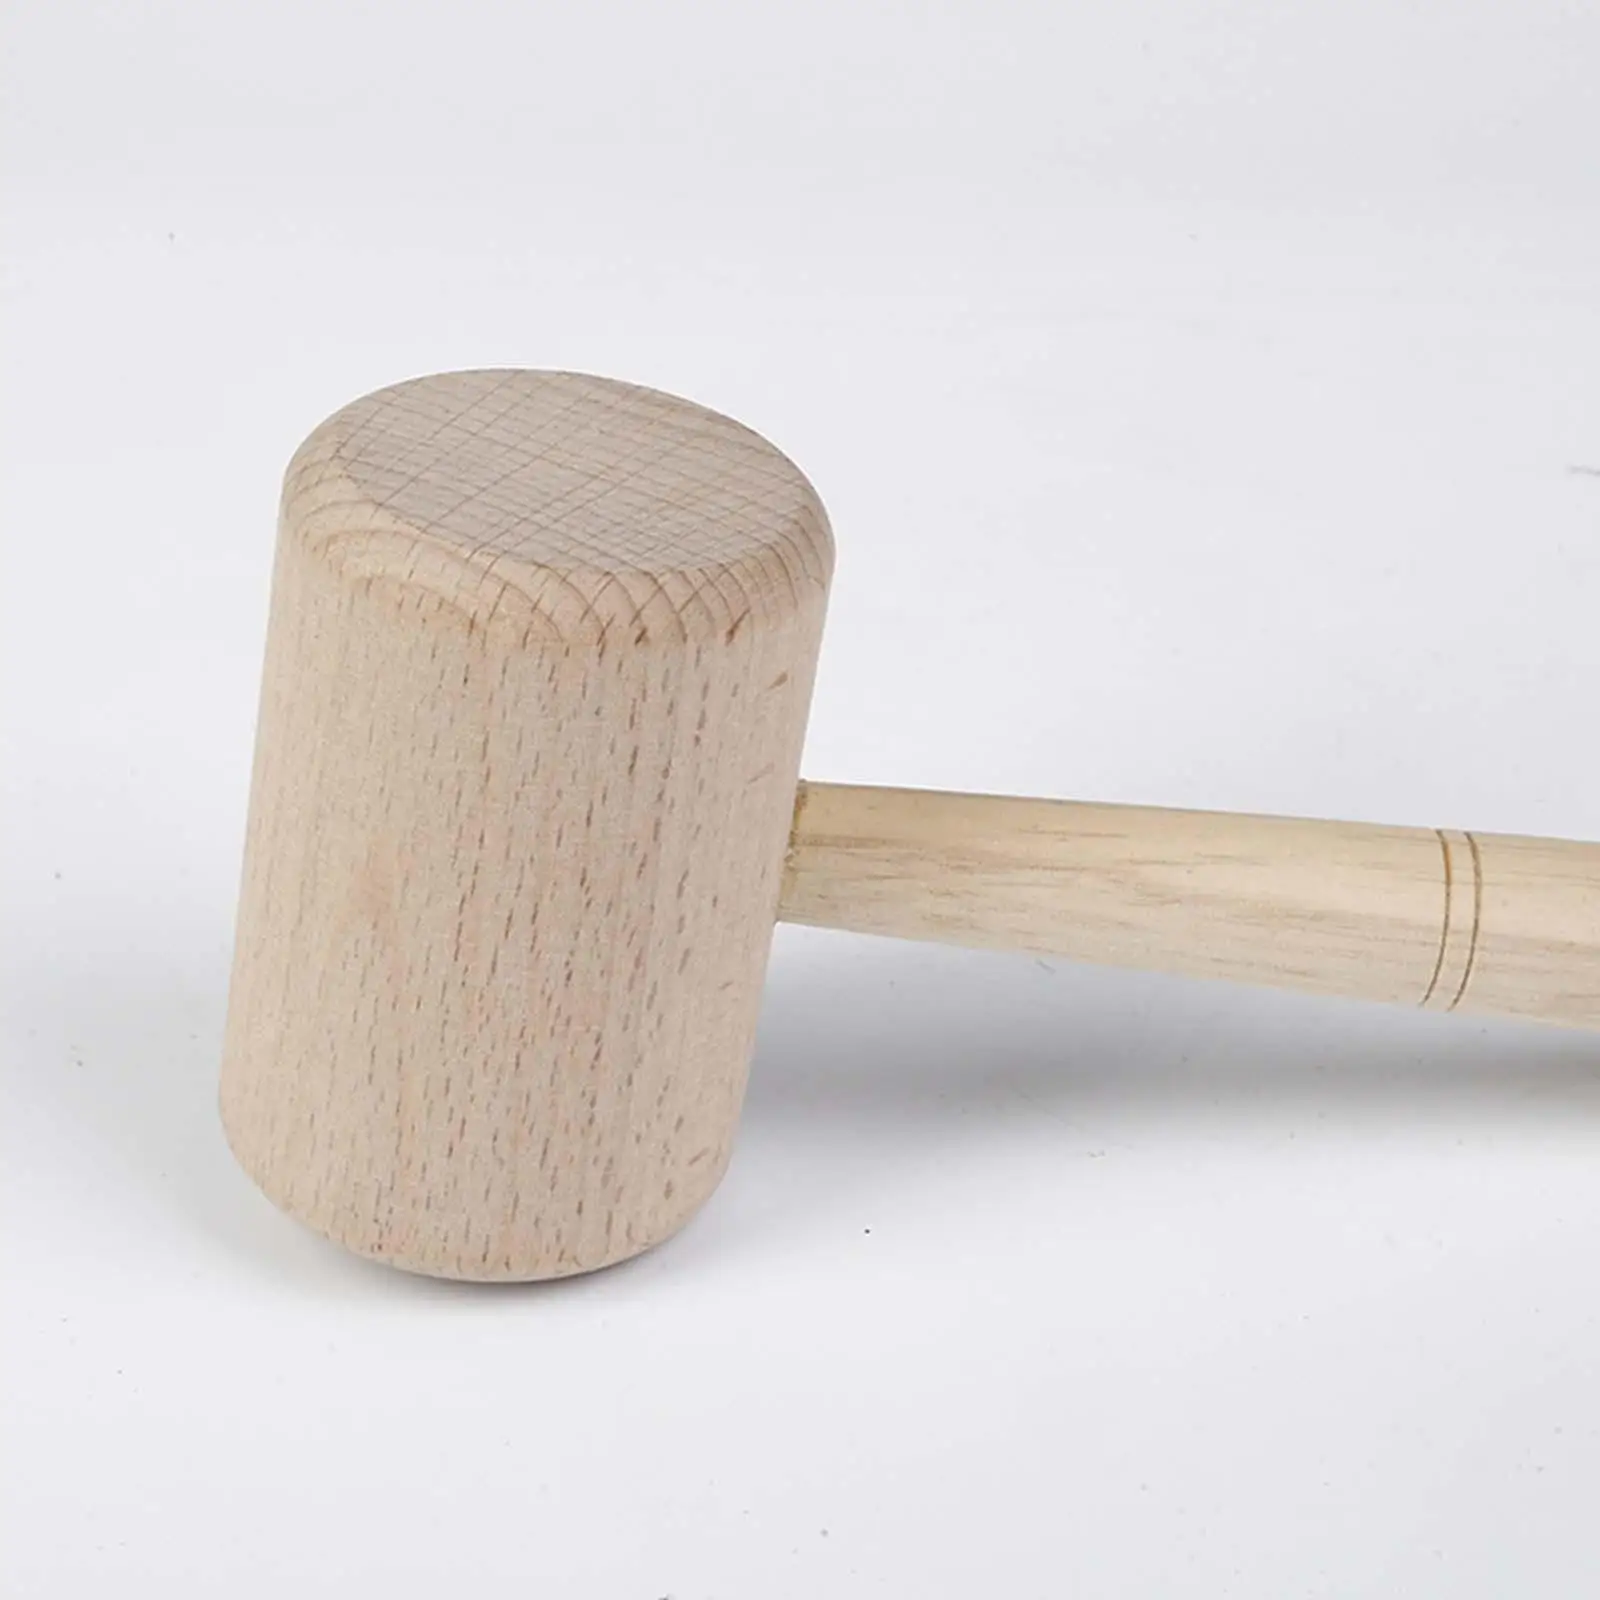 225mm Wood Mini Woodworking Durable Wood Made From Beech Wood for Leather